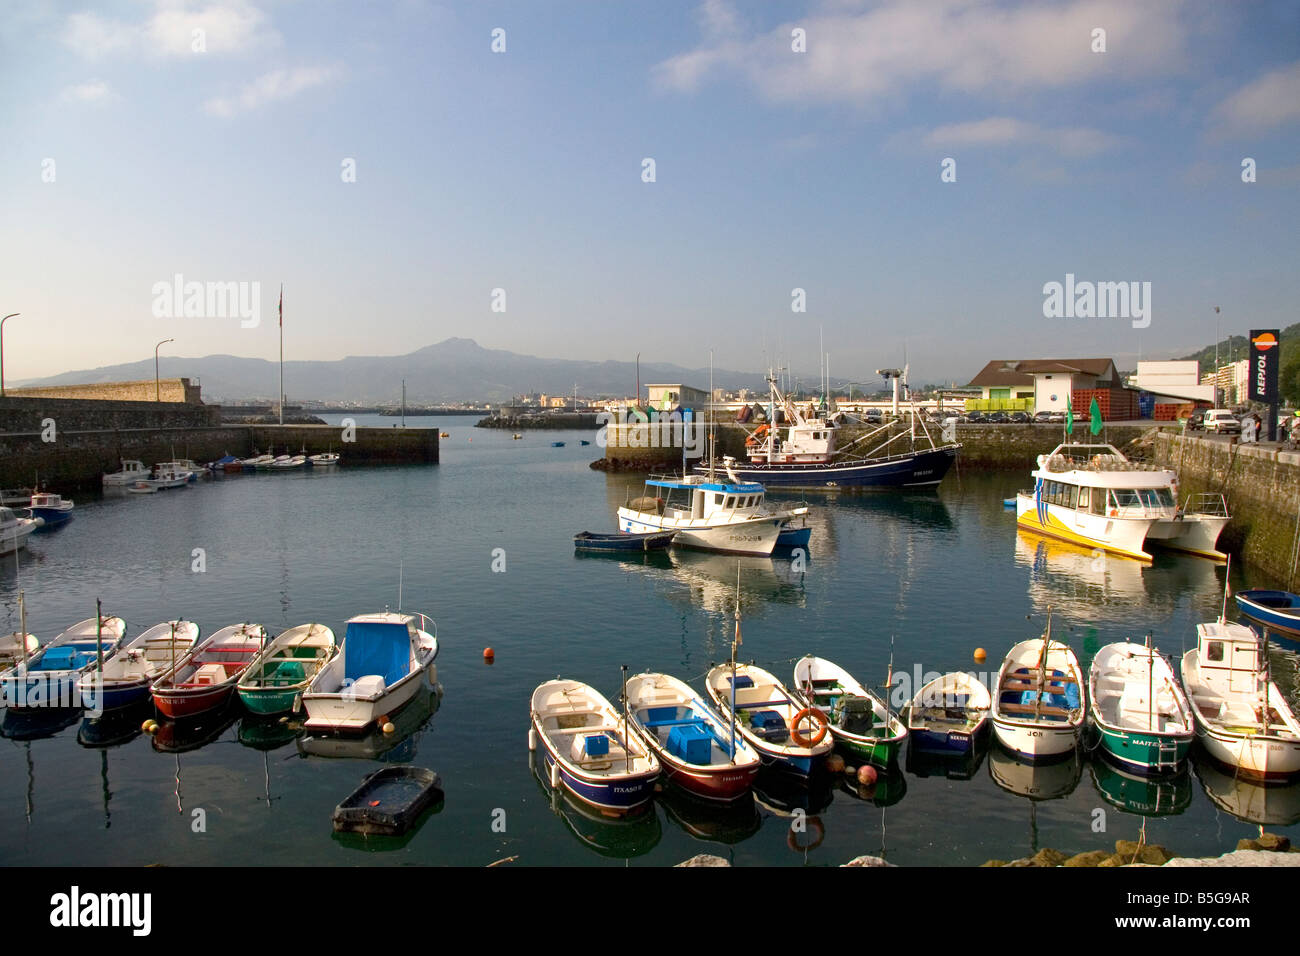 Boats in the Txingudi Bay at the town of Hondarribia Guipuzcoa Basque Country Northern Spain Stock Photo